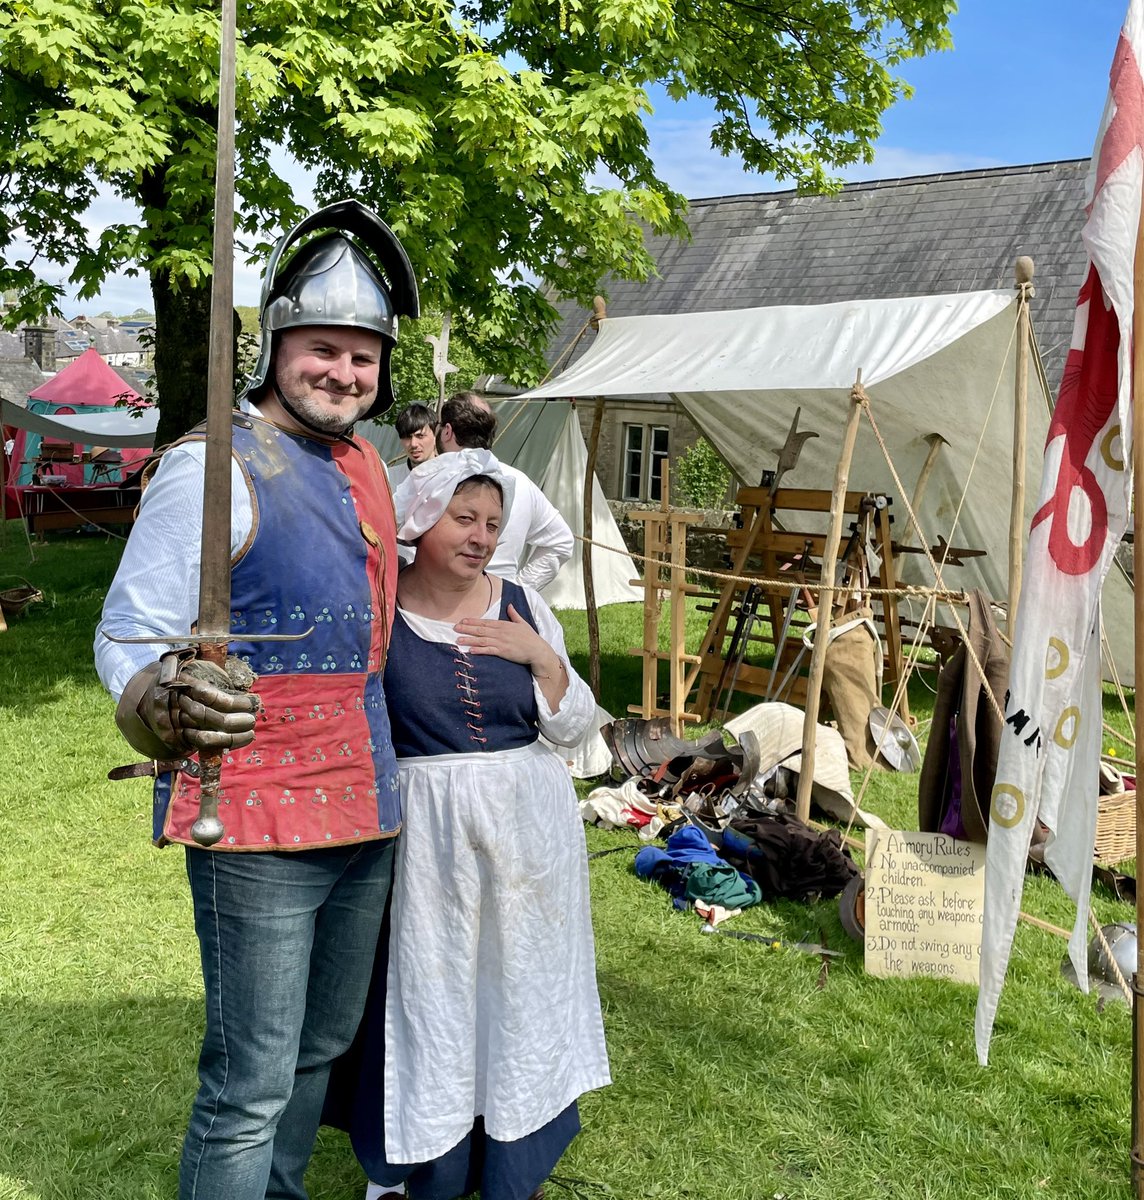 ⚔️ Enjoyed the War of the Roses Era family fun day yesterday in Earby ⚔️